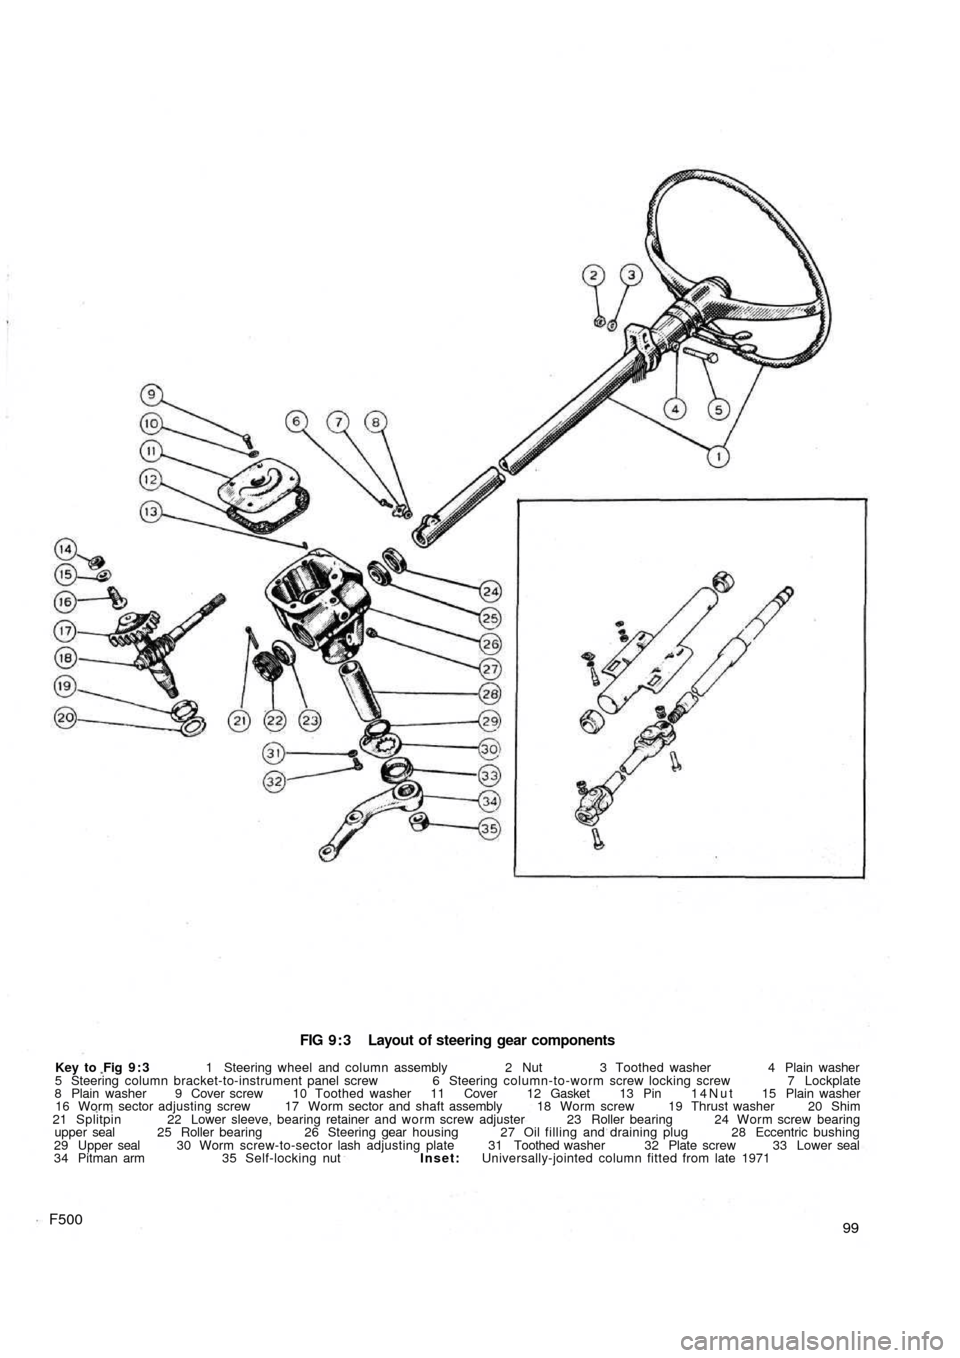 FIAT 500 1968 1.G Workshop Manual FIG 9 : 3  Layout of steering gear components
Key to  Fig 9 : 3 1 Steering wheel and column assembly 2 Nut 3 Toothed washer 4 Plain washer
5 Steering column bracket-to-instrument panel screw 6 Steerin